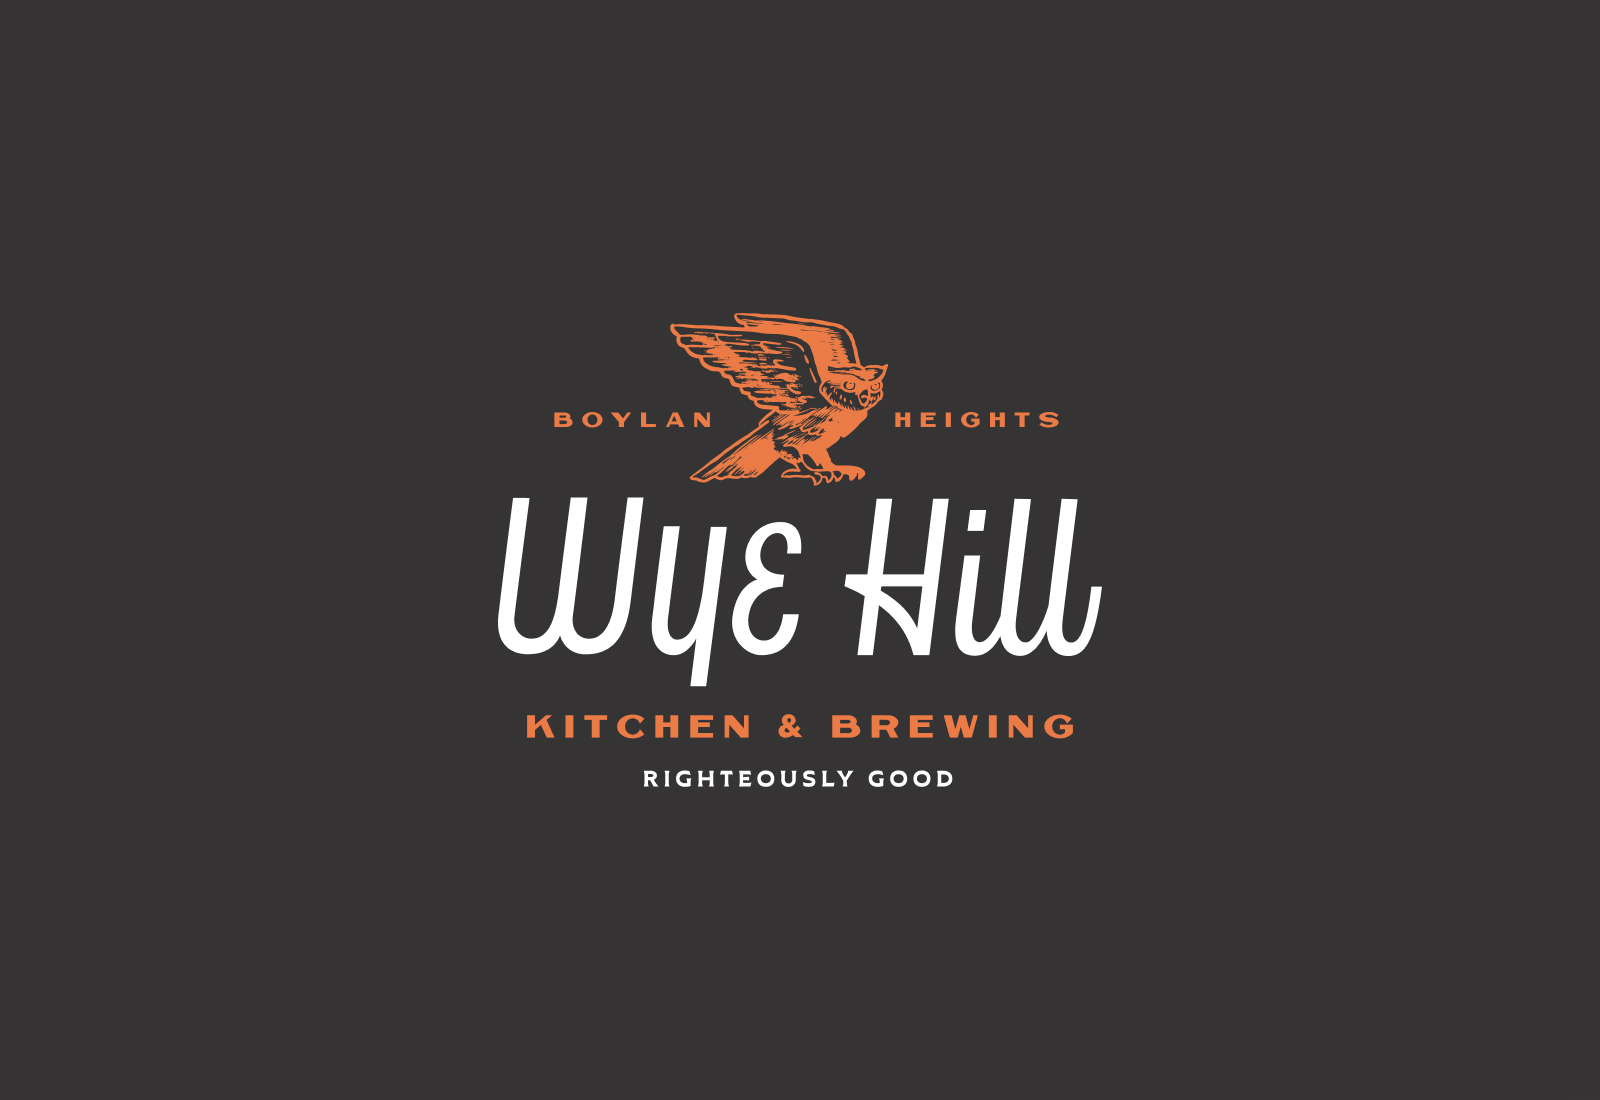 Primary Logo with Tagline | Brand Identity for Wye Hill Kitchen and Brewing in Raleigh, NC